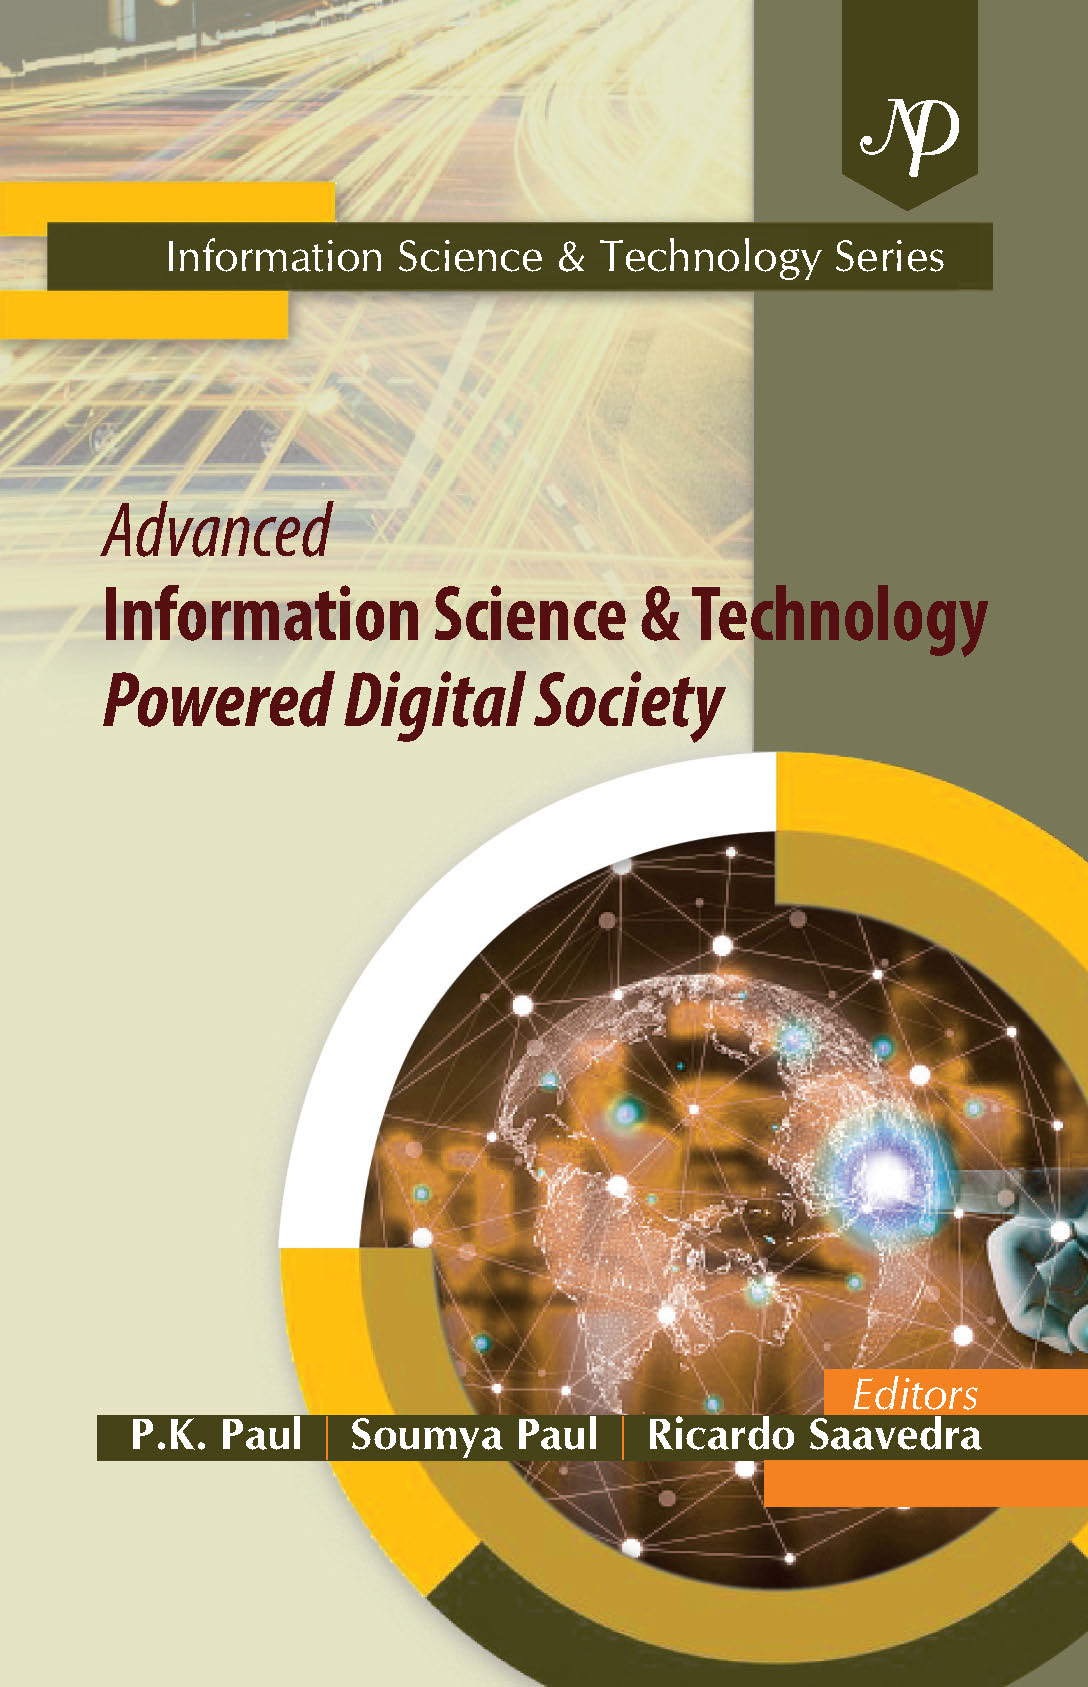 Advanced Information Science & Technology Powered Digital Society Cover.jpg